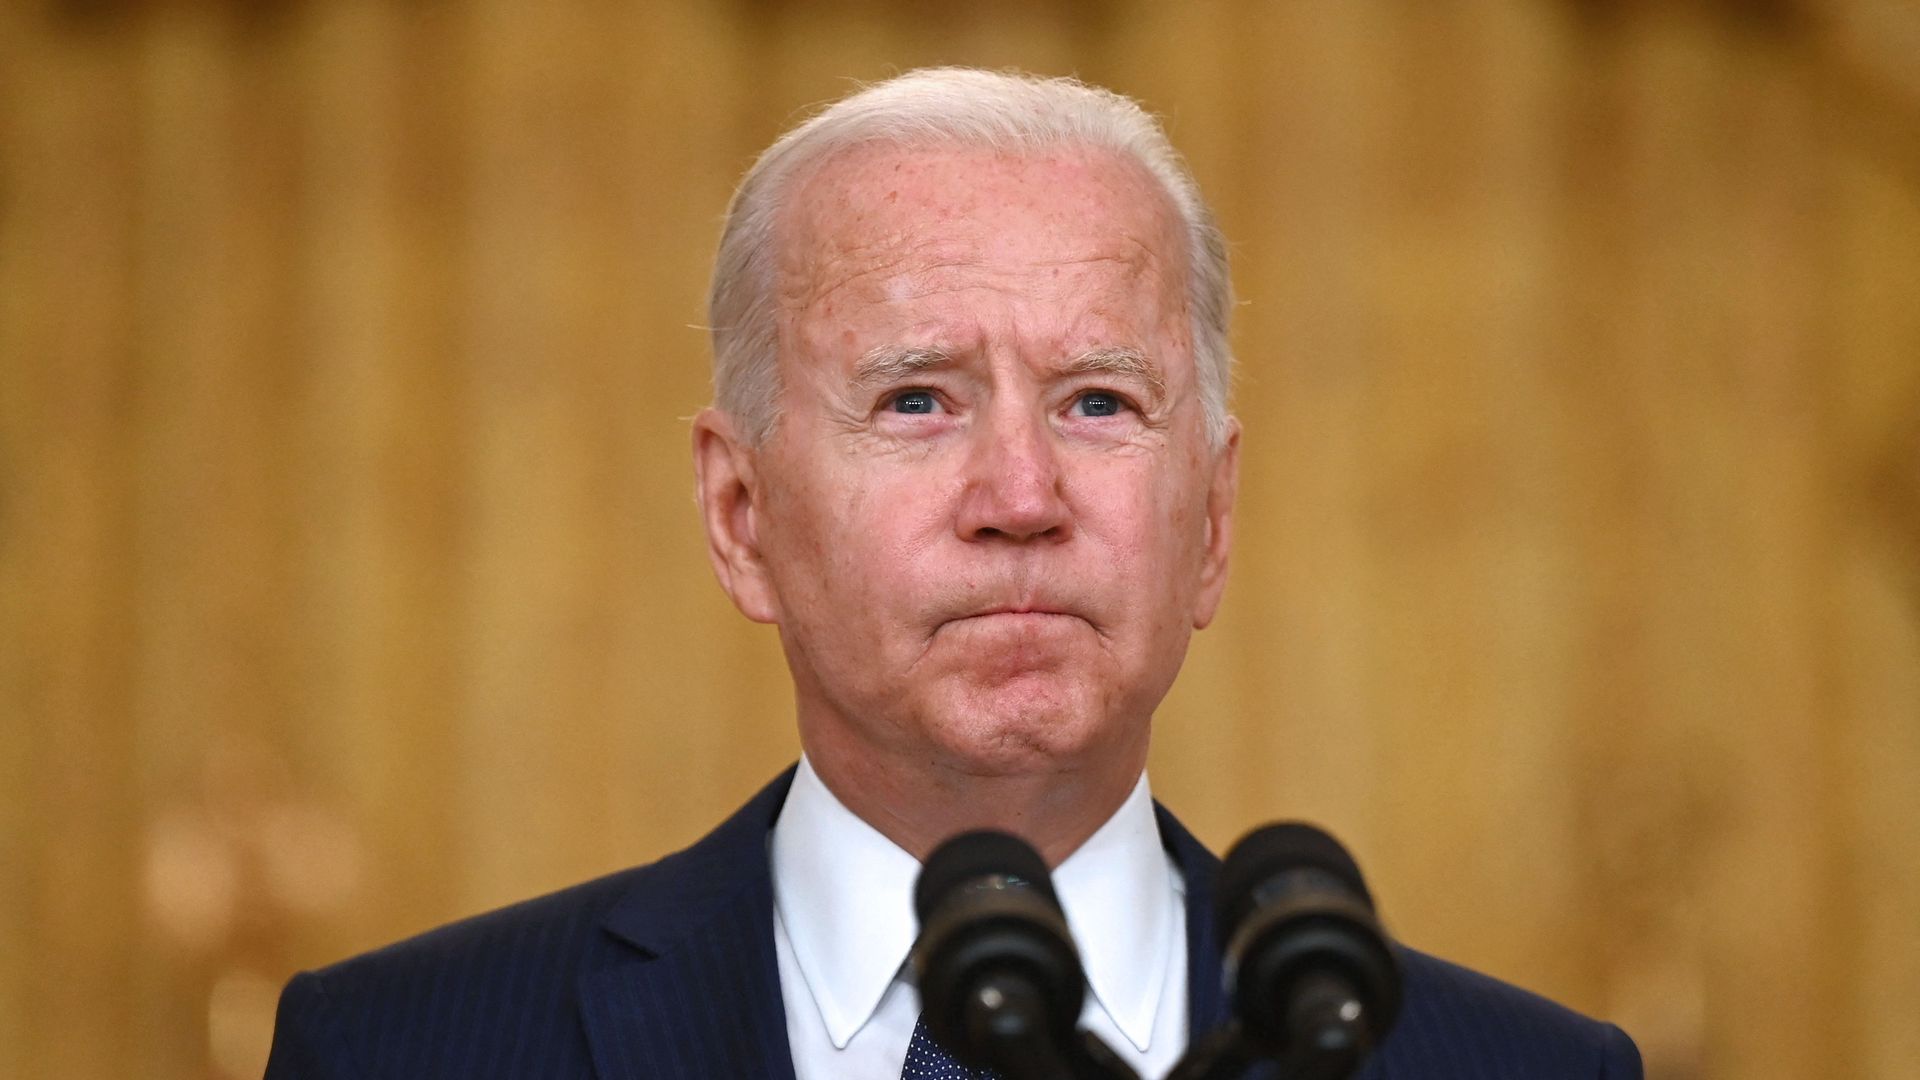 President Biden sands in front of a microphone with pursed lips.